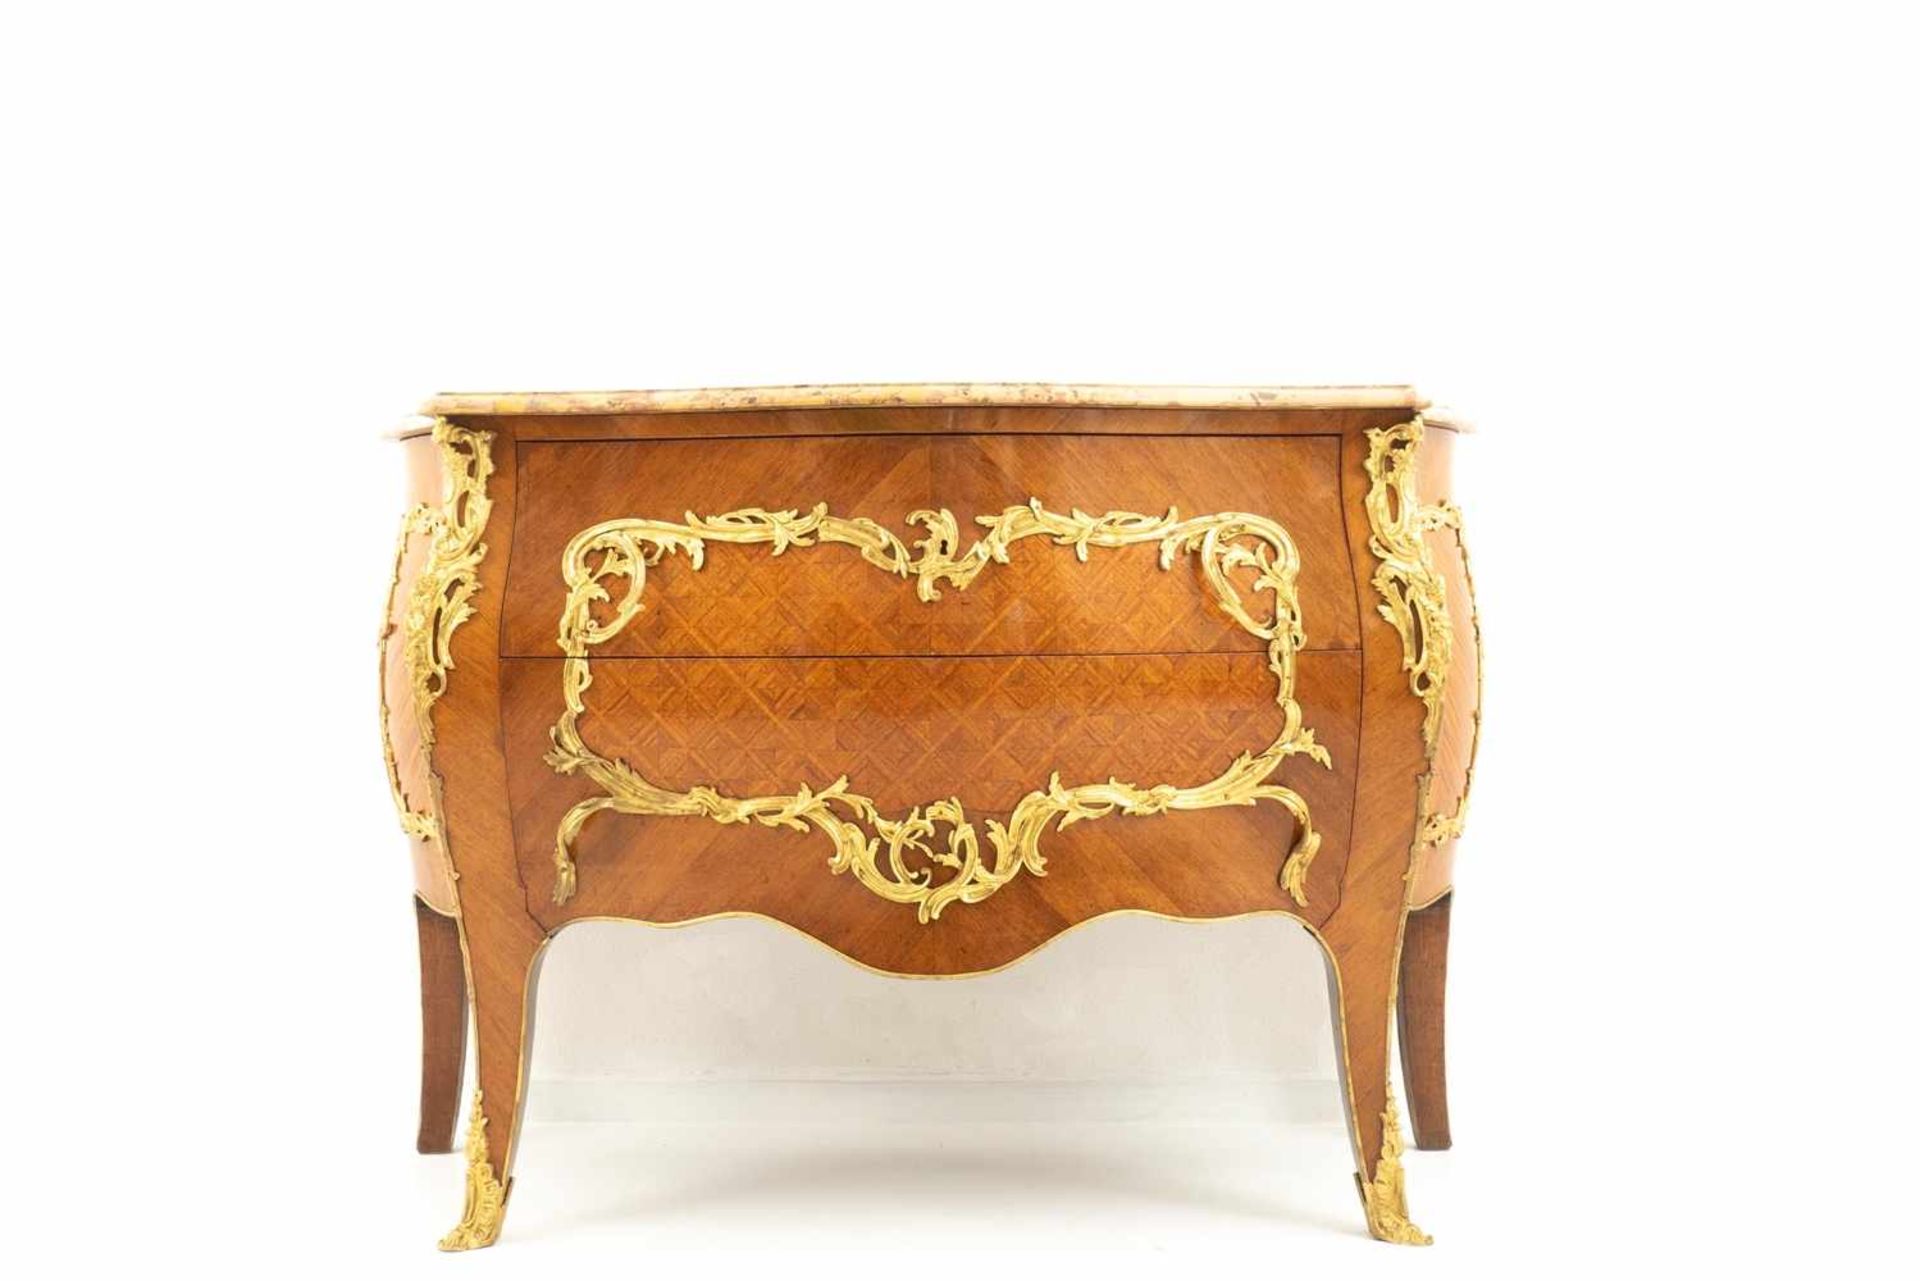 Bulging ornate chest of drawers with bronze appliqué<